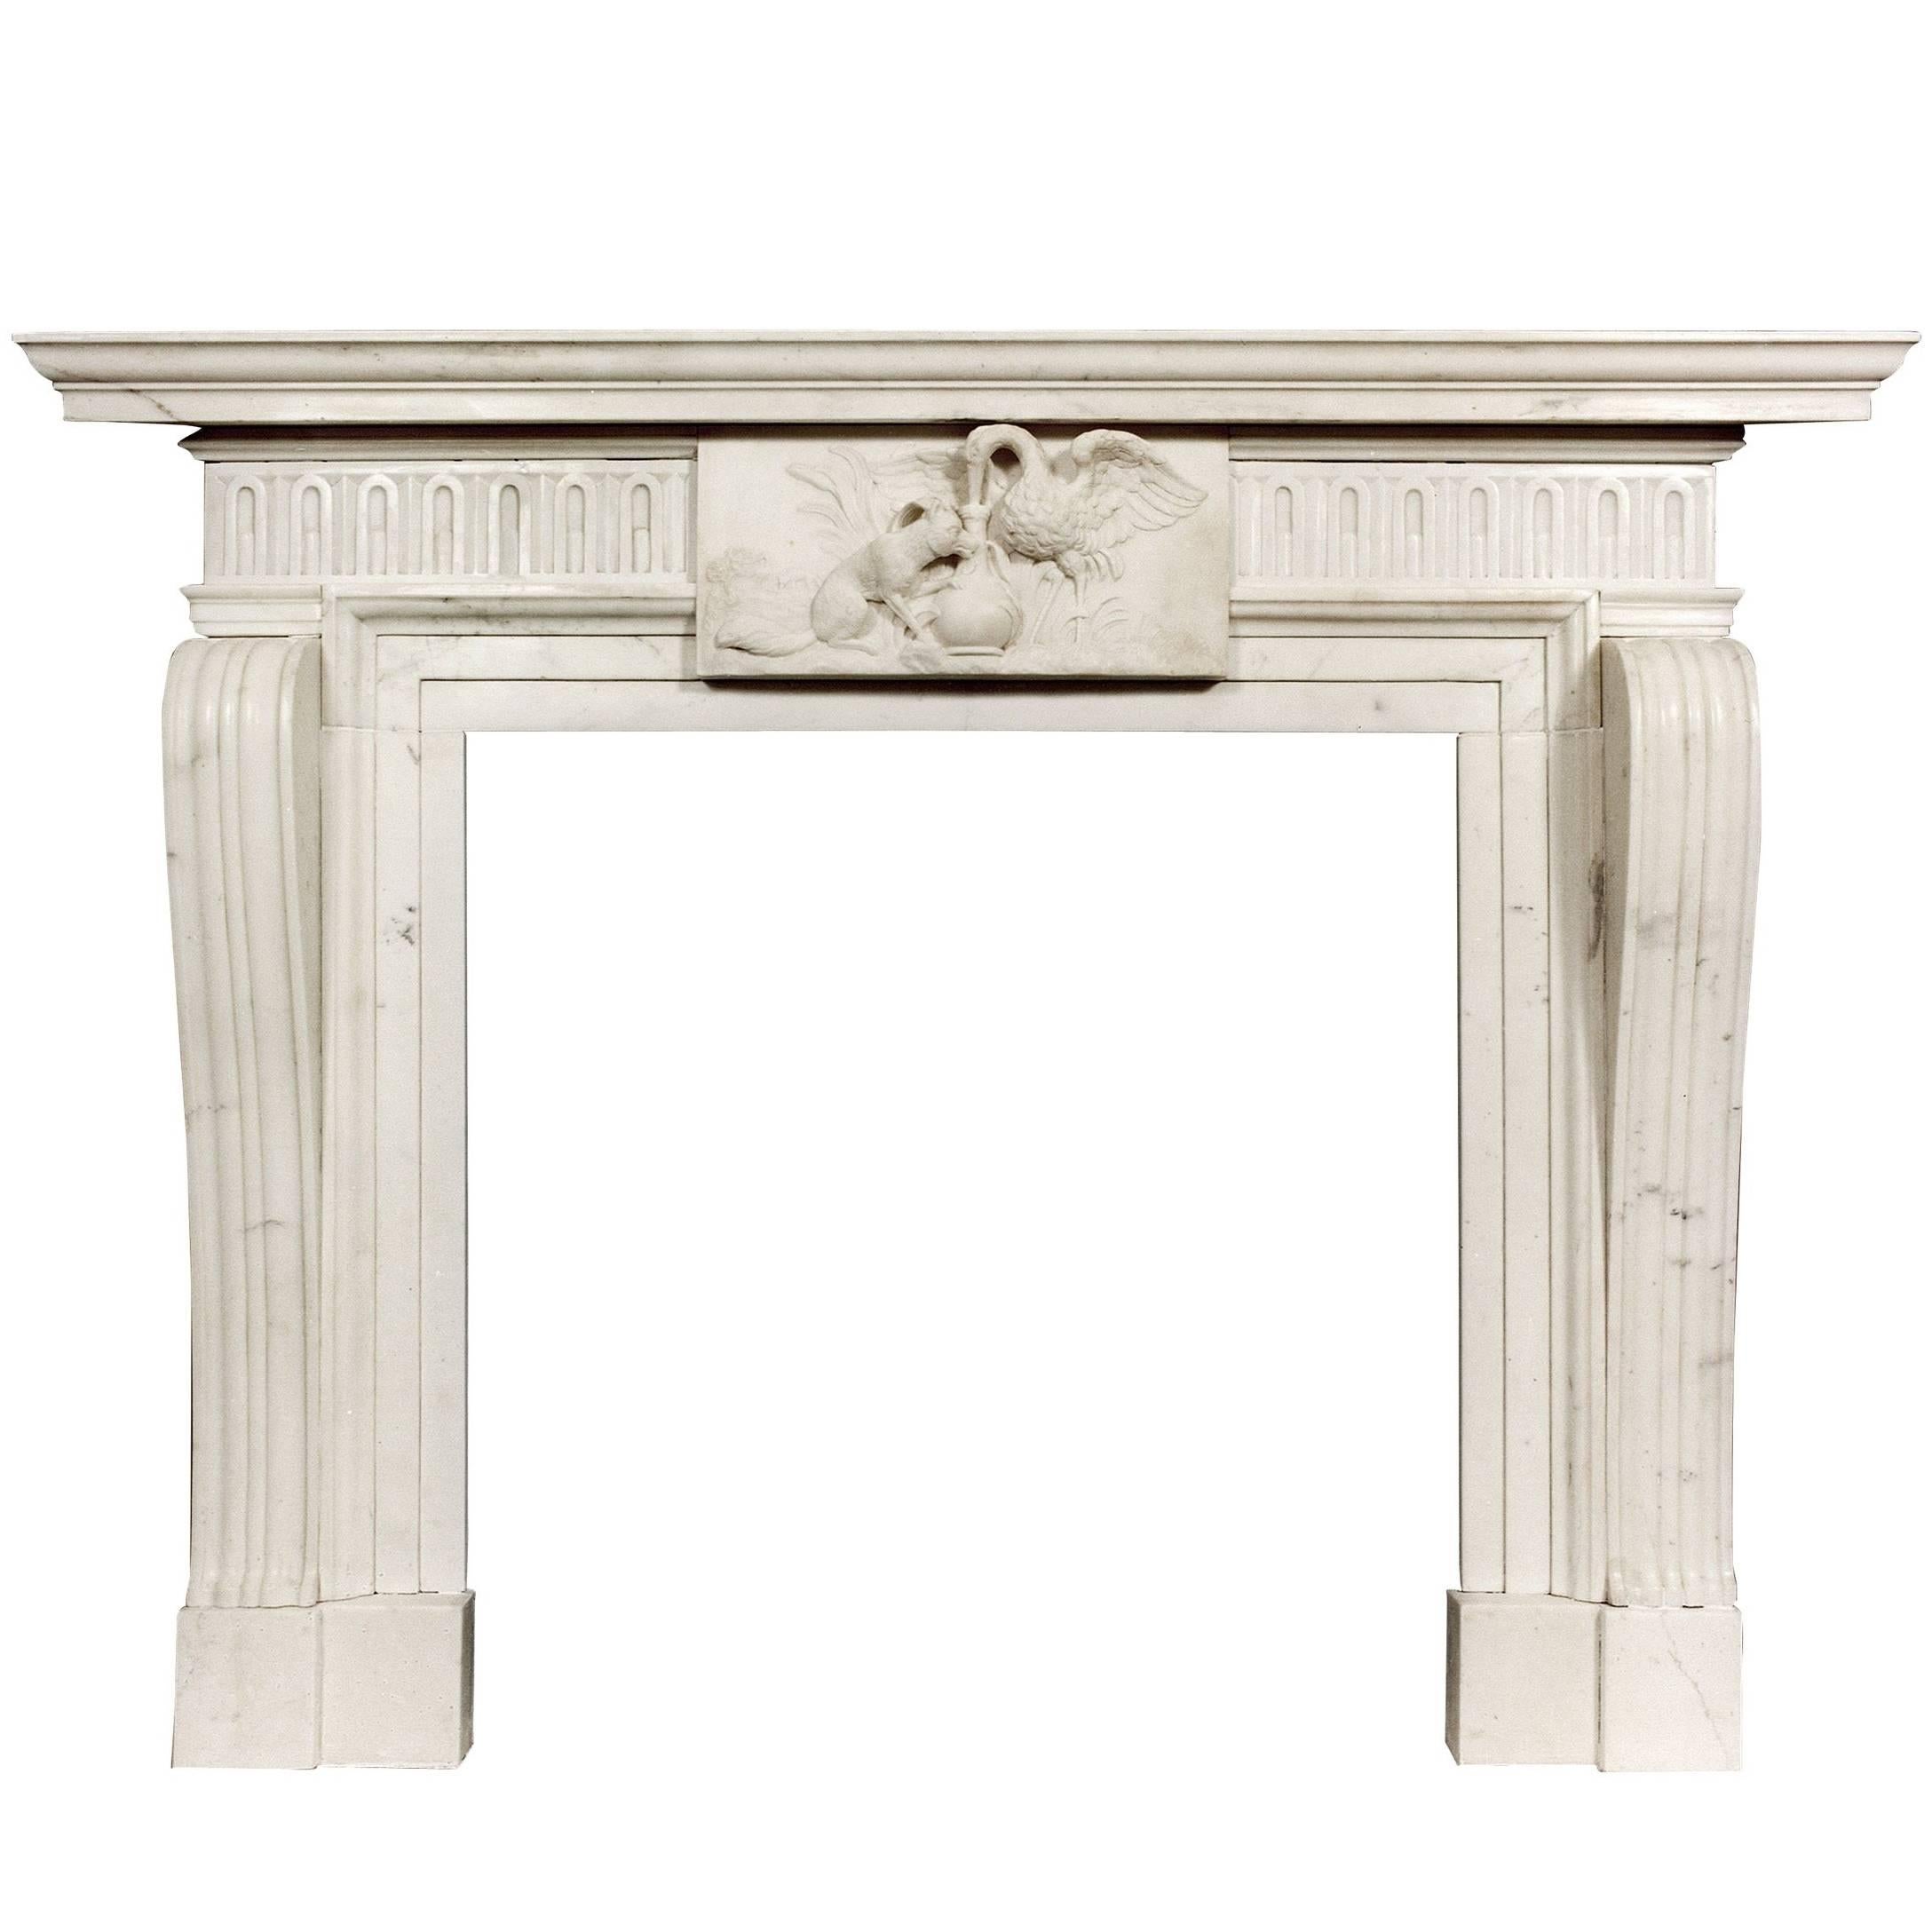 Well Carved Antique English Statuary White Marble Fireplace For Sale